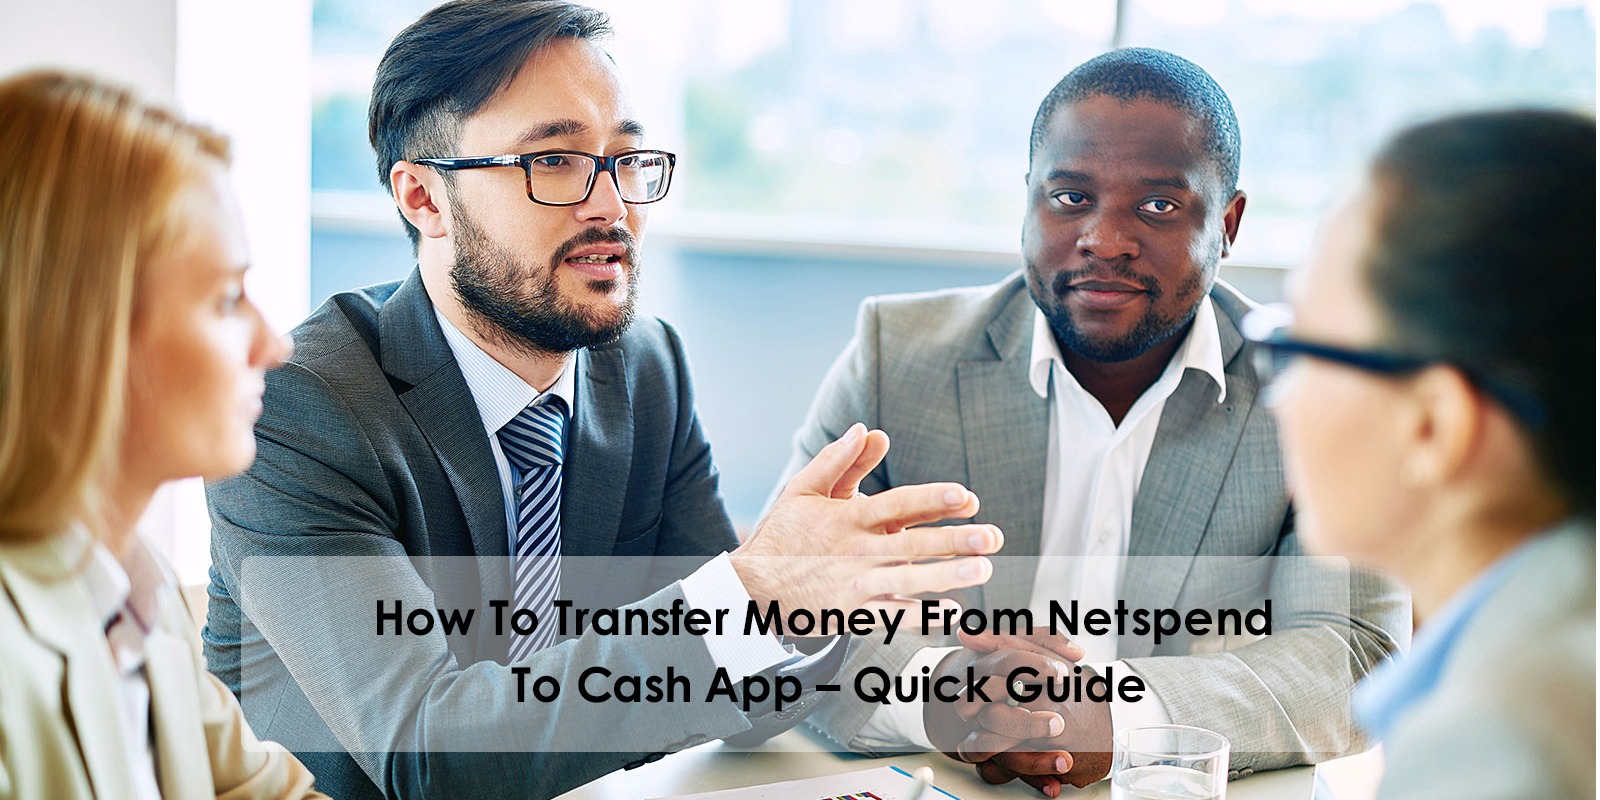 How To Transfer Money From Netspend To Cash App – Quick Guide